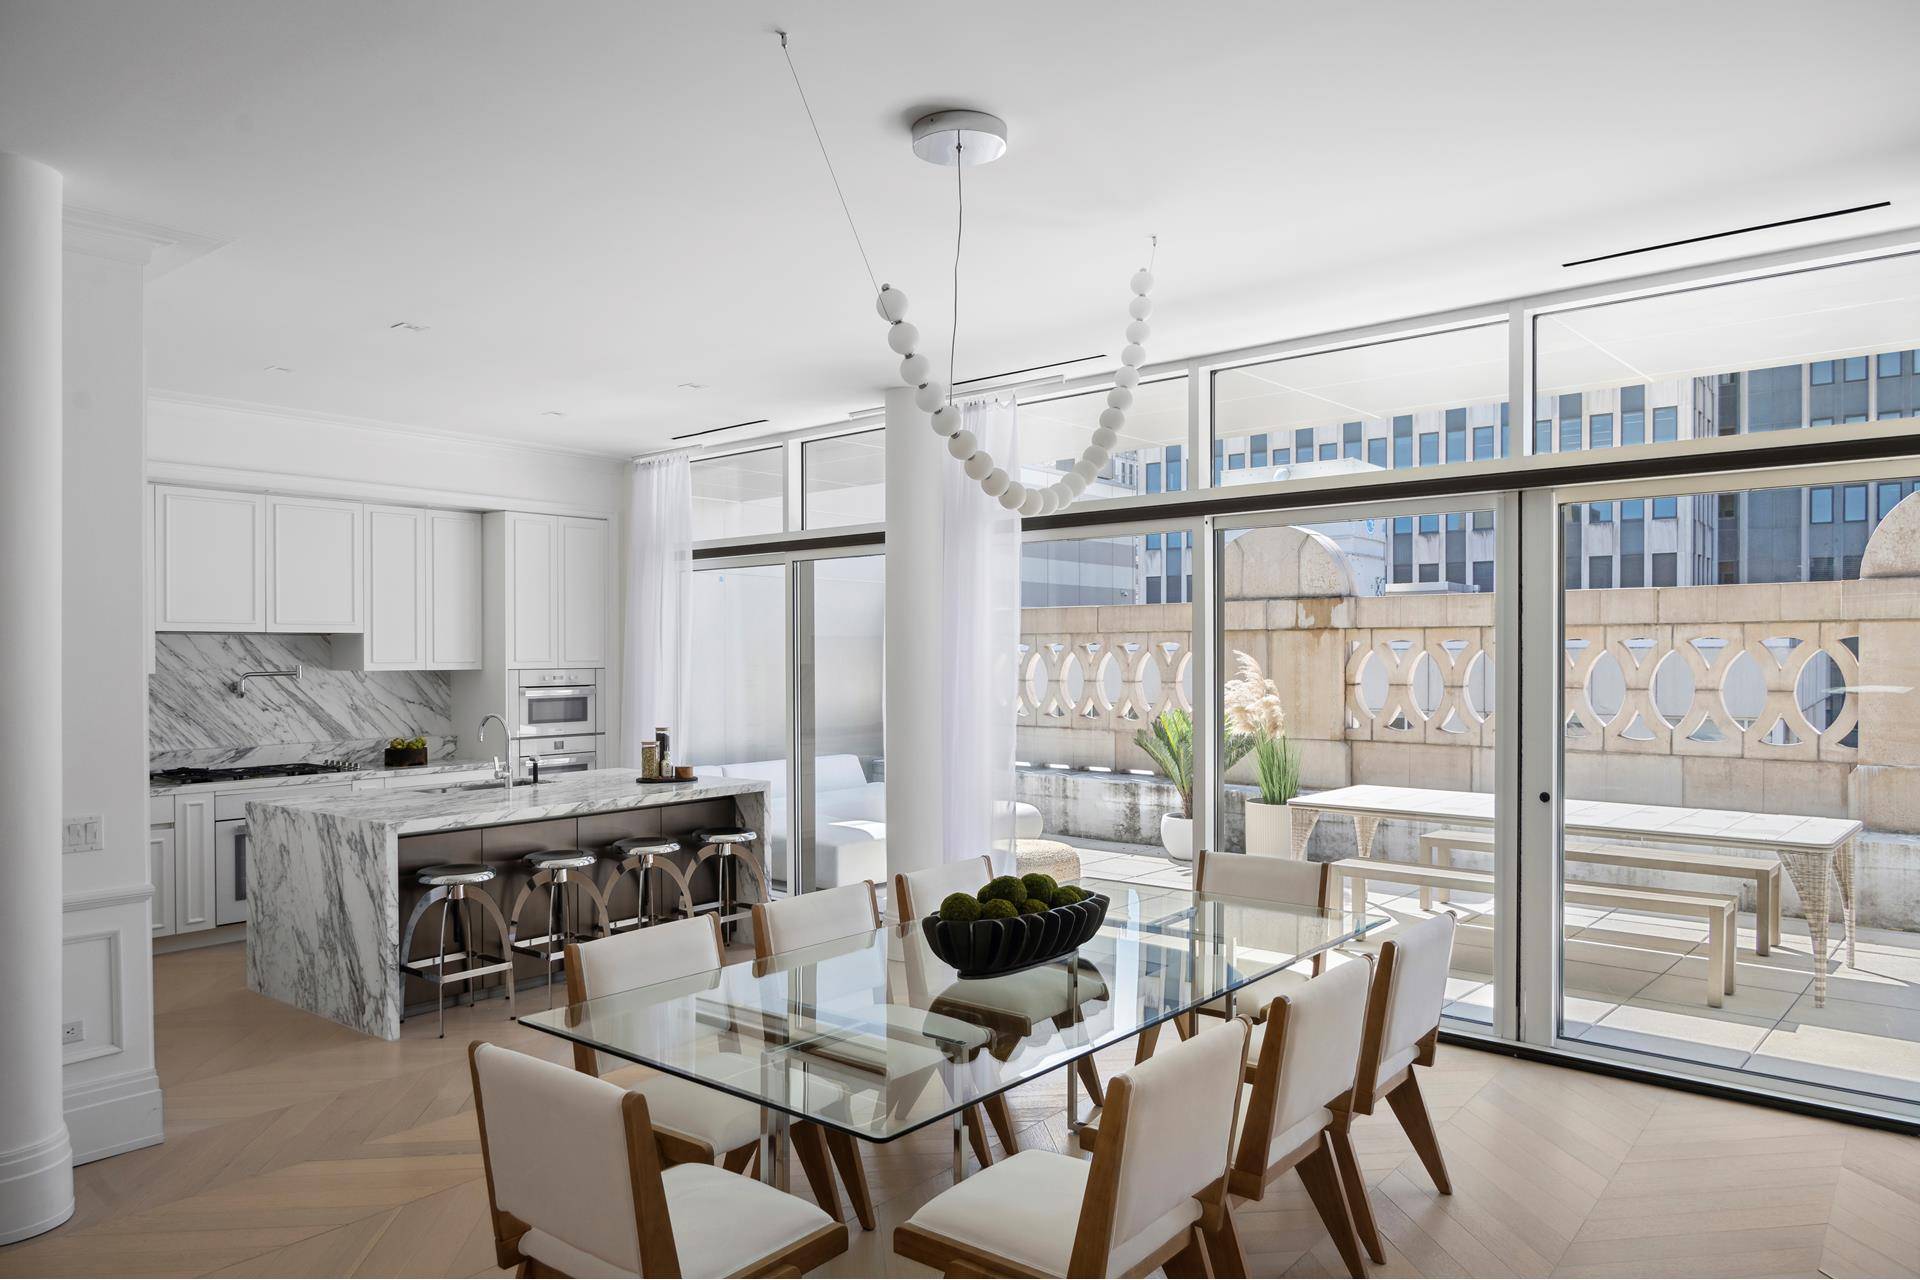 Nestled within the esteemed Crown Collection of 108 Leonard, Penthouse 15B offers 3 bedrooms plus a den and over 1, 000 square feet of outdoor space across two stunning terraces.